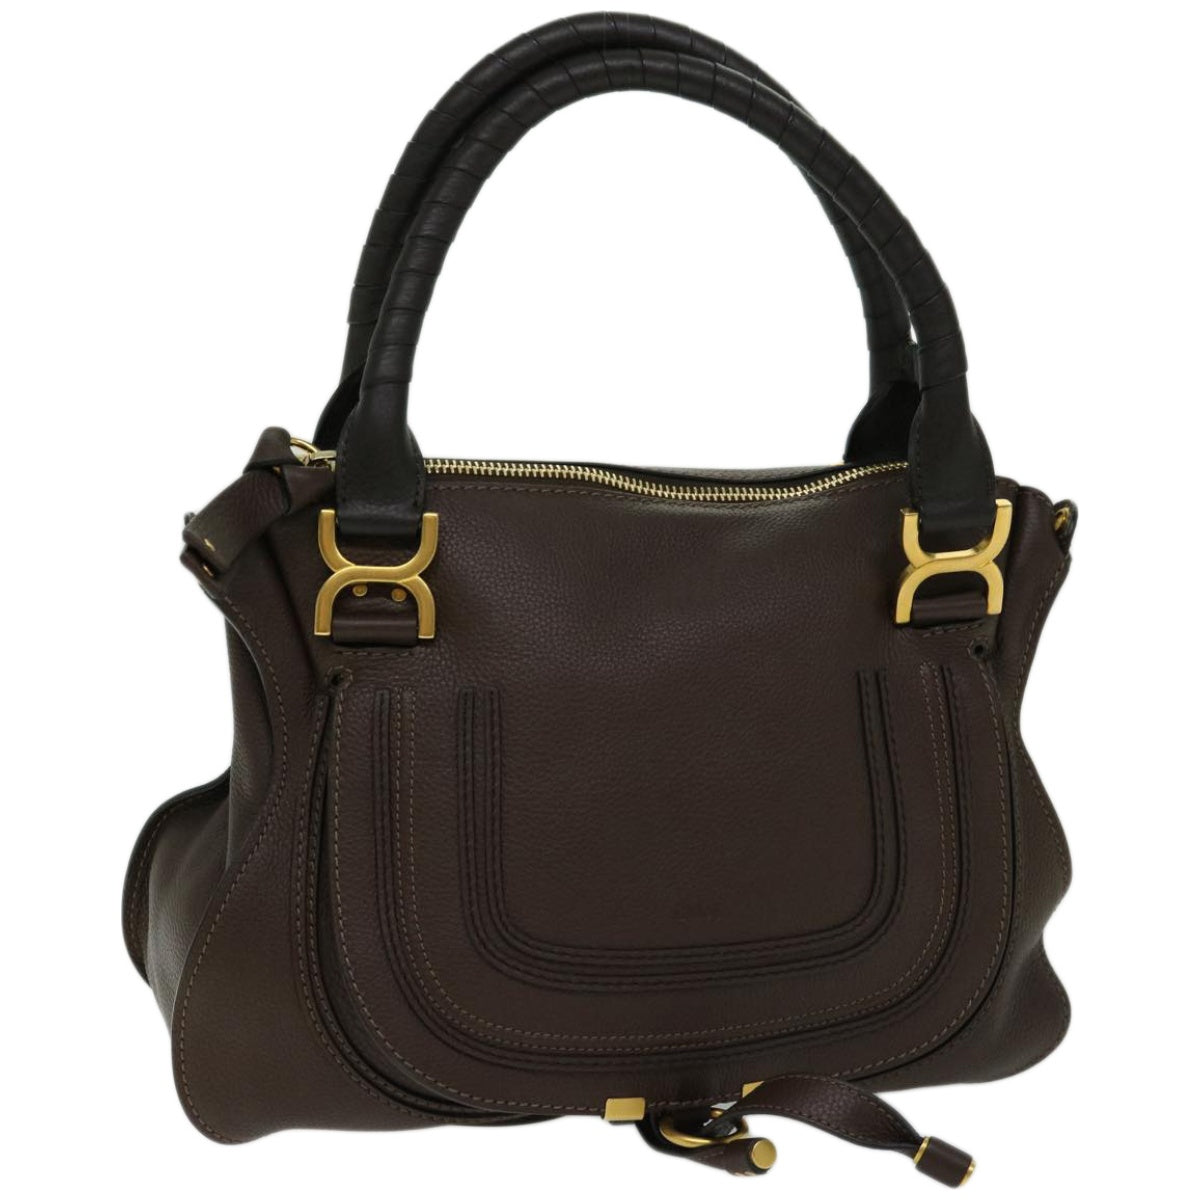 Chloe Mercy Hand Bag Leather 2way Brown Auth am5851